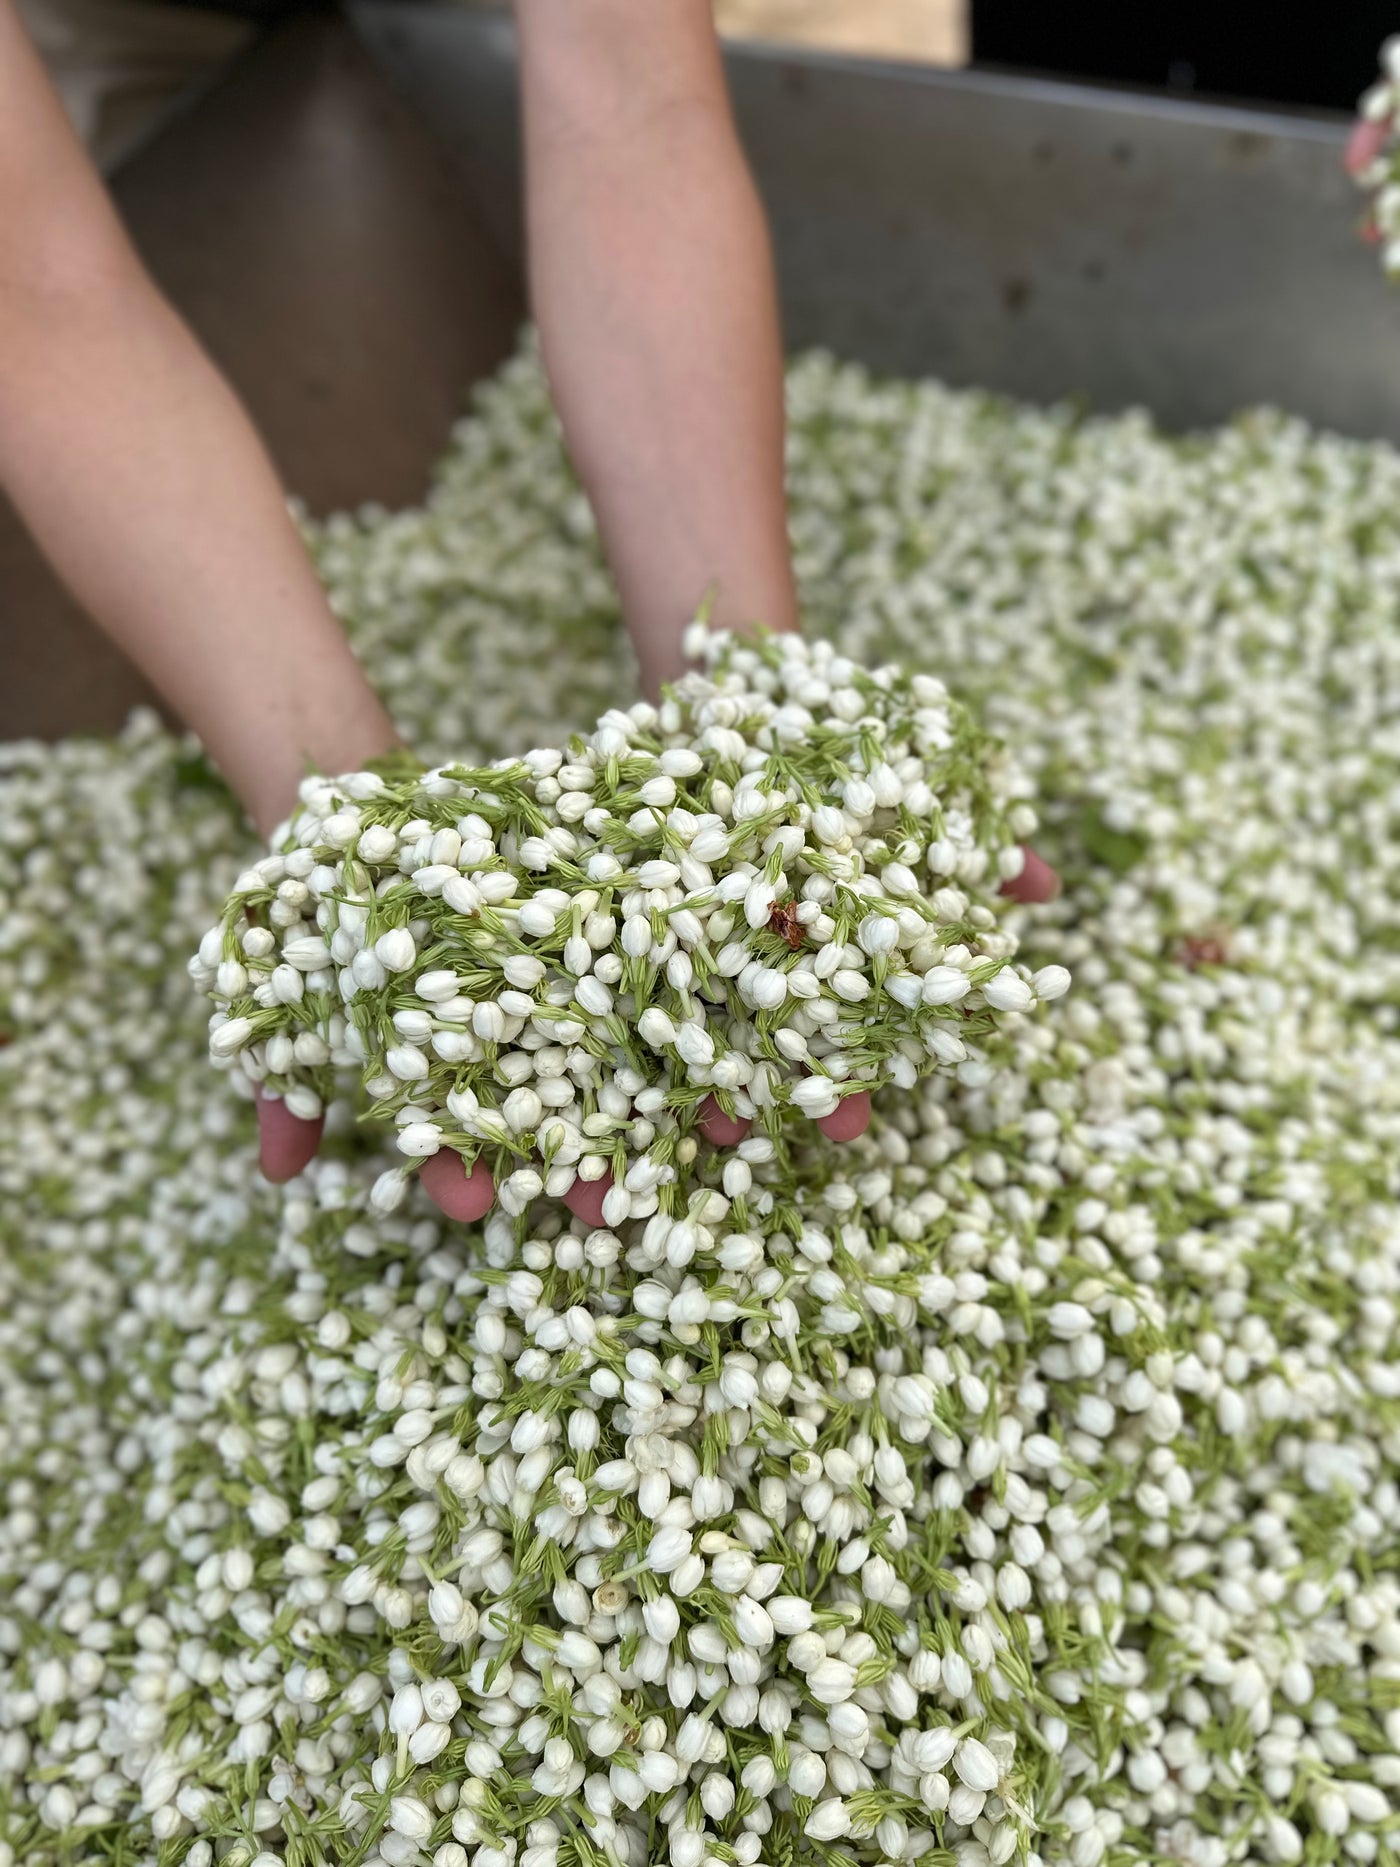 Hands reaching into a large basket of just-picked jasmine blossoms.